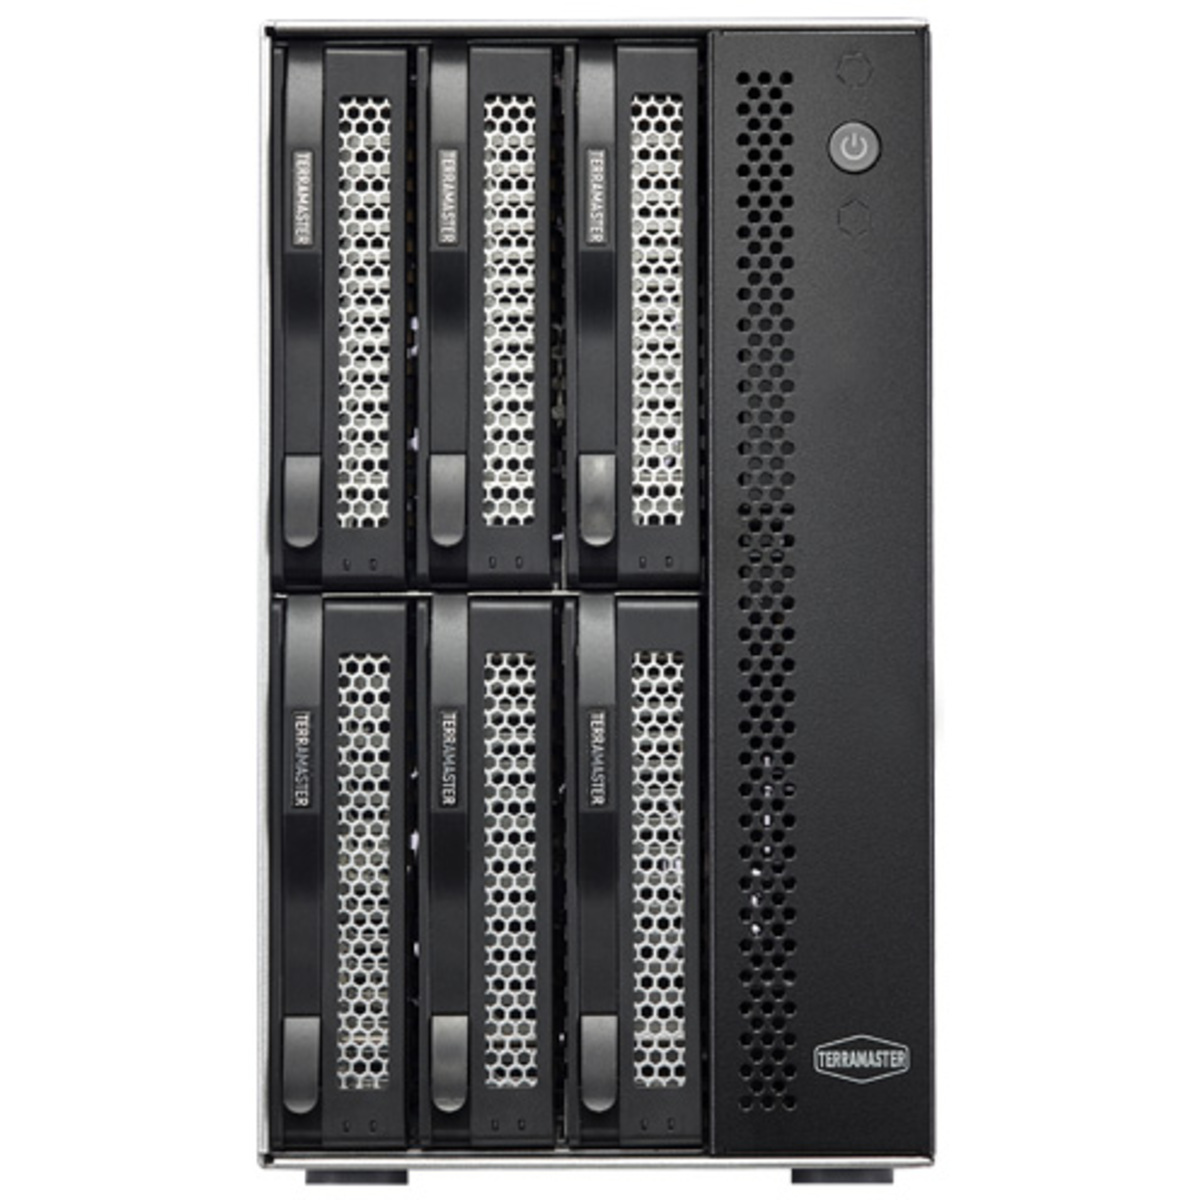 TerraMaster D6-320 80tb 6-Bay Desktop Multimedia / Power User / Business DAS - Direct Attached Storage Device 4x20tb Western Digital Red Pro WD201KFGX 3.5 7200rpm SATA 6Gb/s HDD NAS Class Drives Installed - Burn-In Tested D6-320